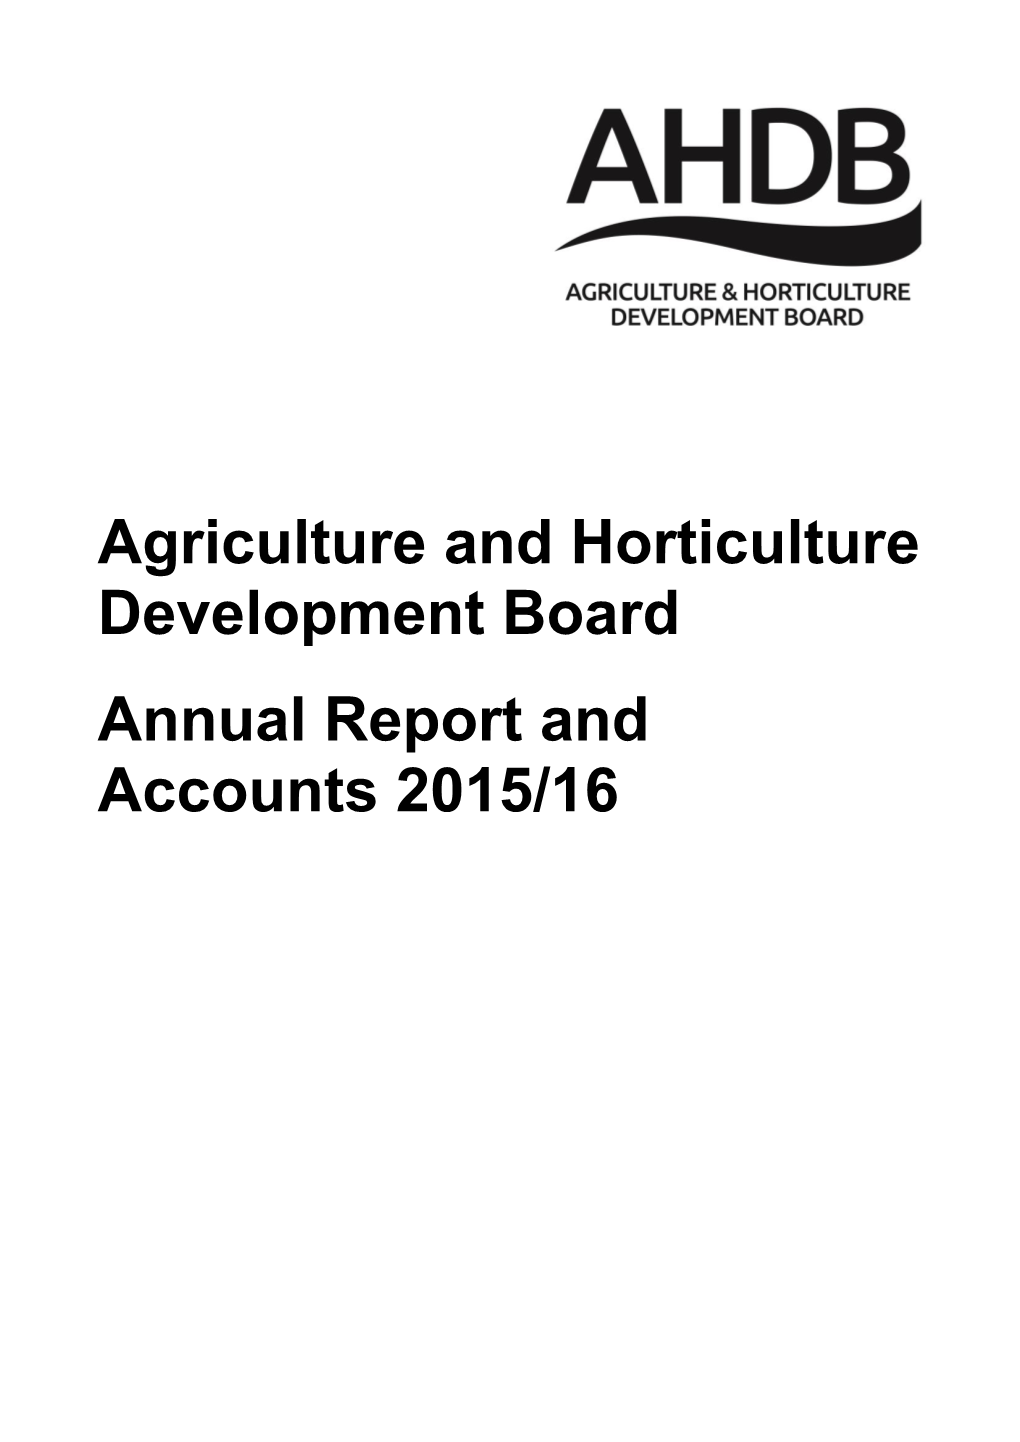 AHDB Annual Report and Accounts 2015/16